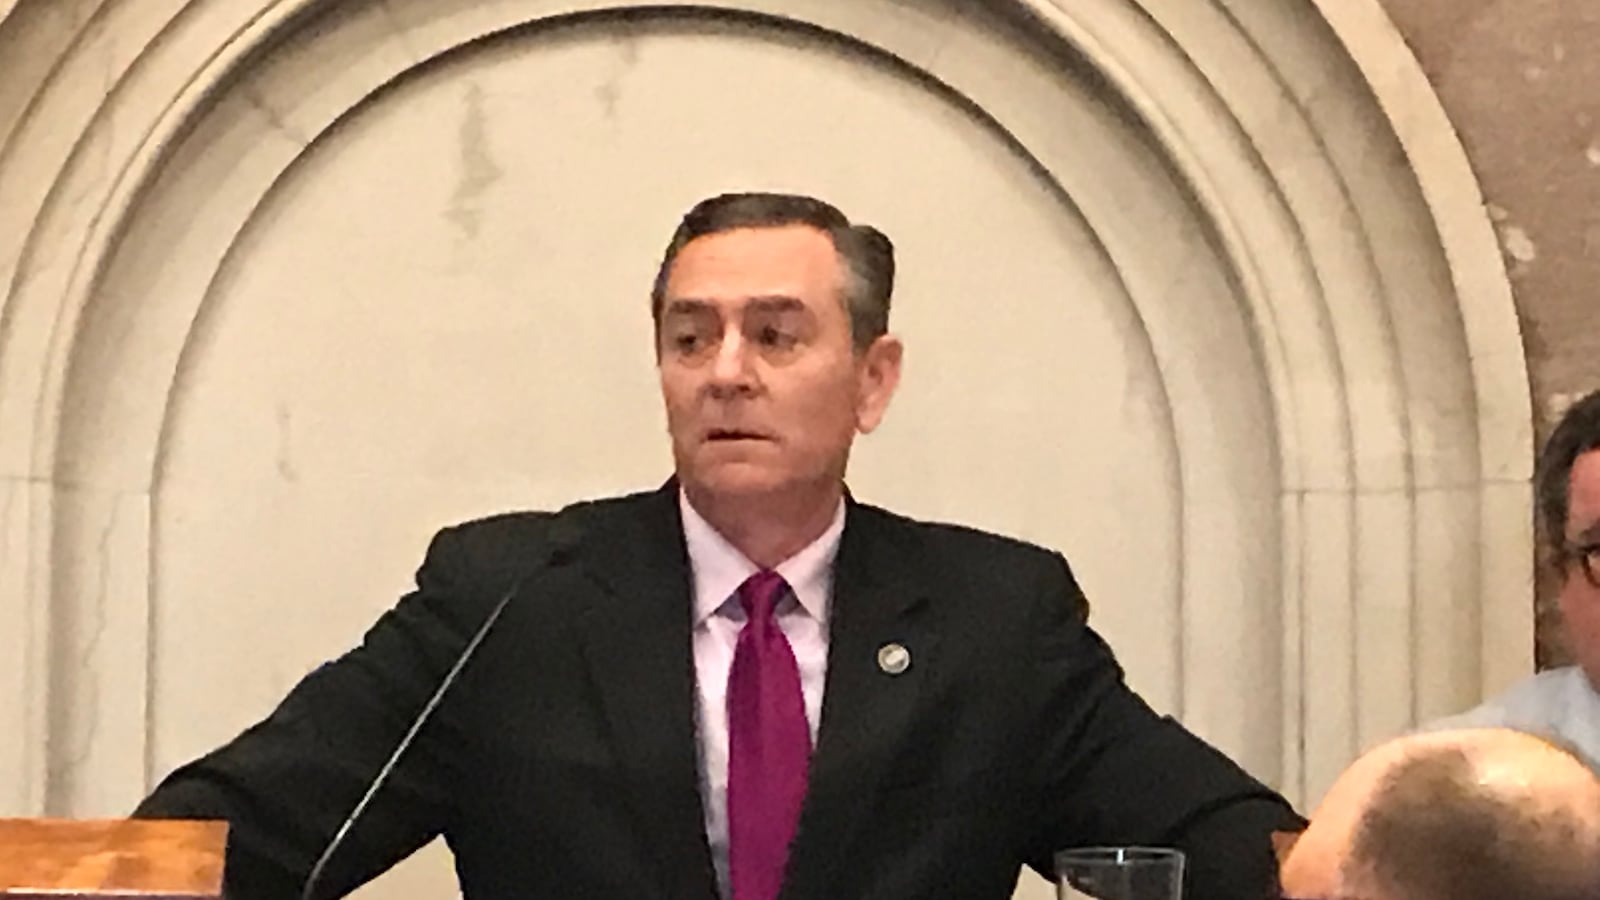 Rep. Glen Casada, a Republican from Franklin, was voted speaker of the House in January. (Photo by Marta W. Aldrich)